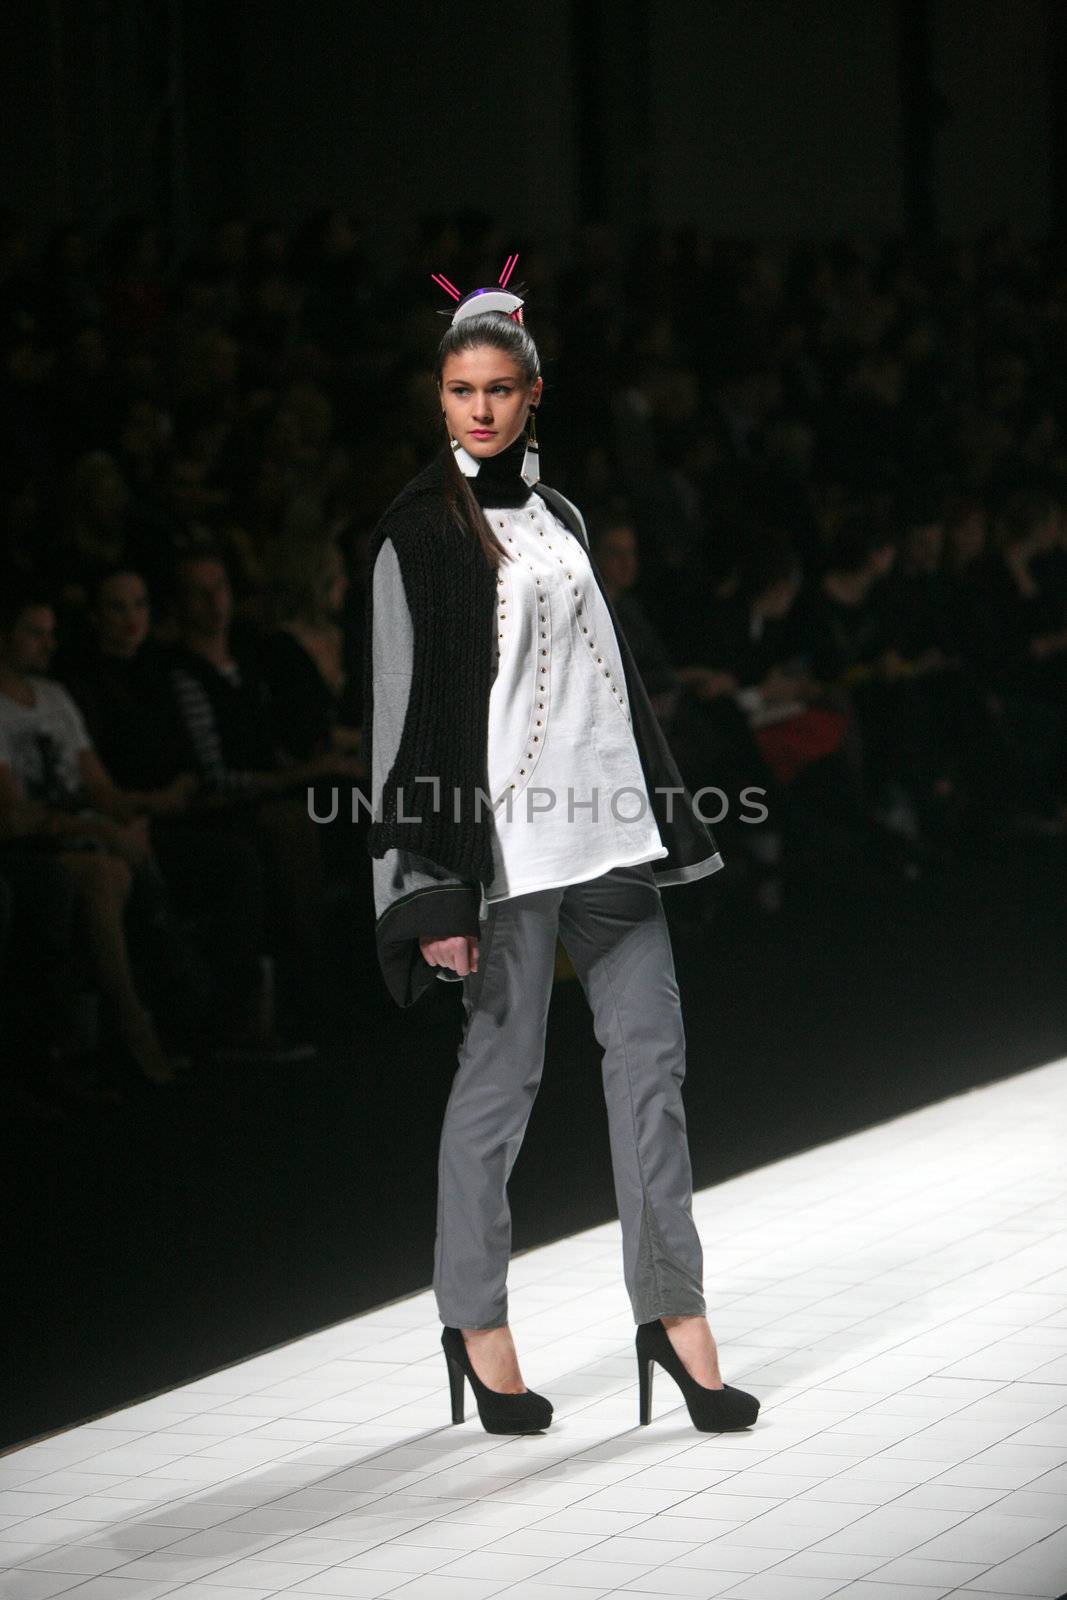 ZAGREB, CROATIA - MARCH 15: Fashion model wears clothes made by design group "Clash of 9" on "Dove FASHION.HR" show on March 15, 2012 in Zagreb, Croatia.